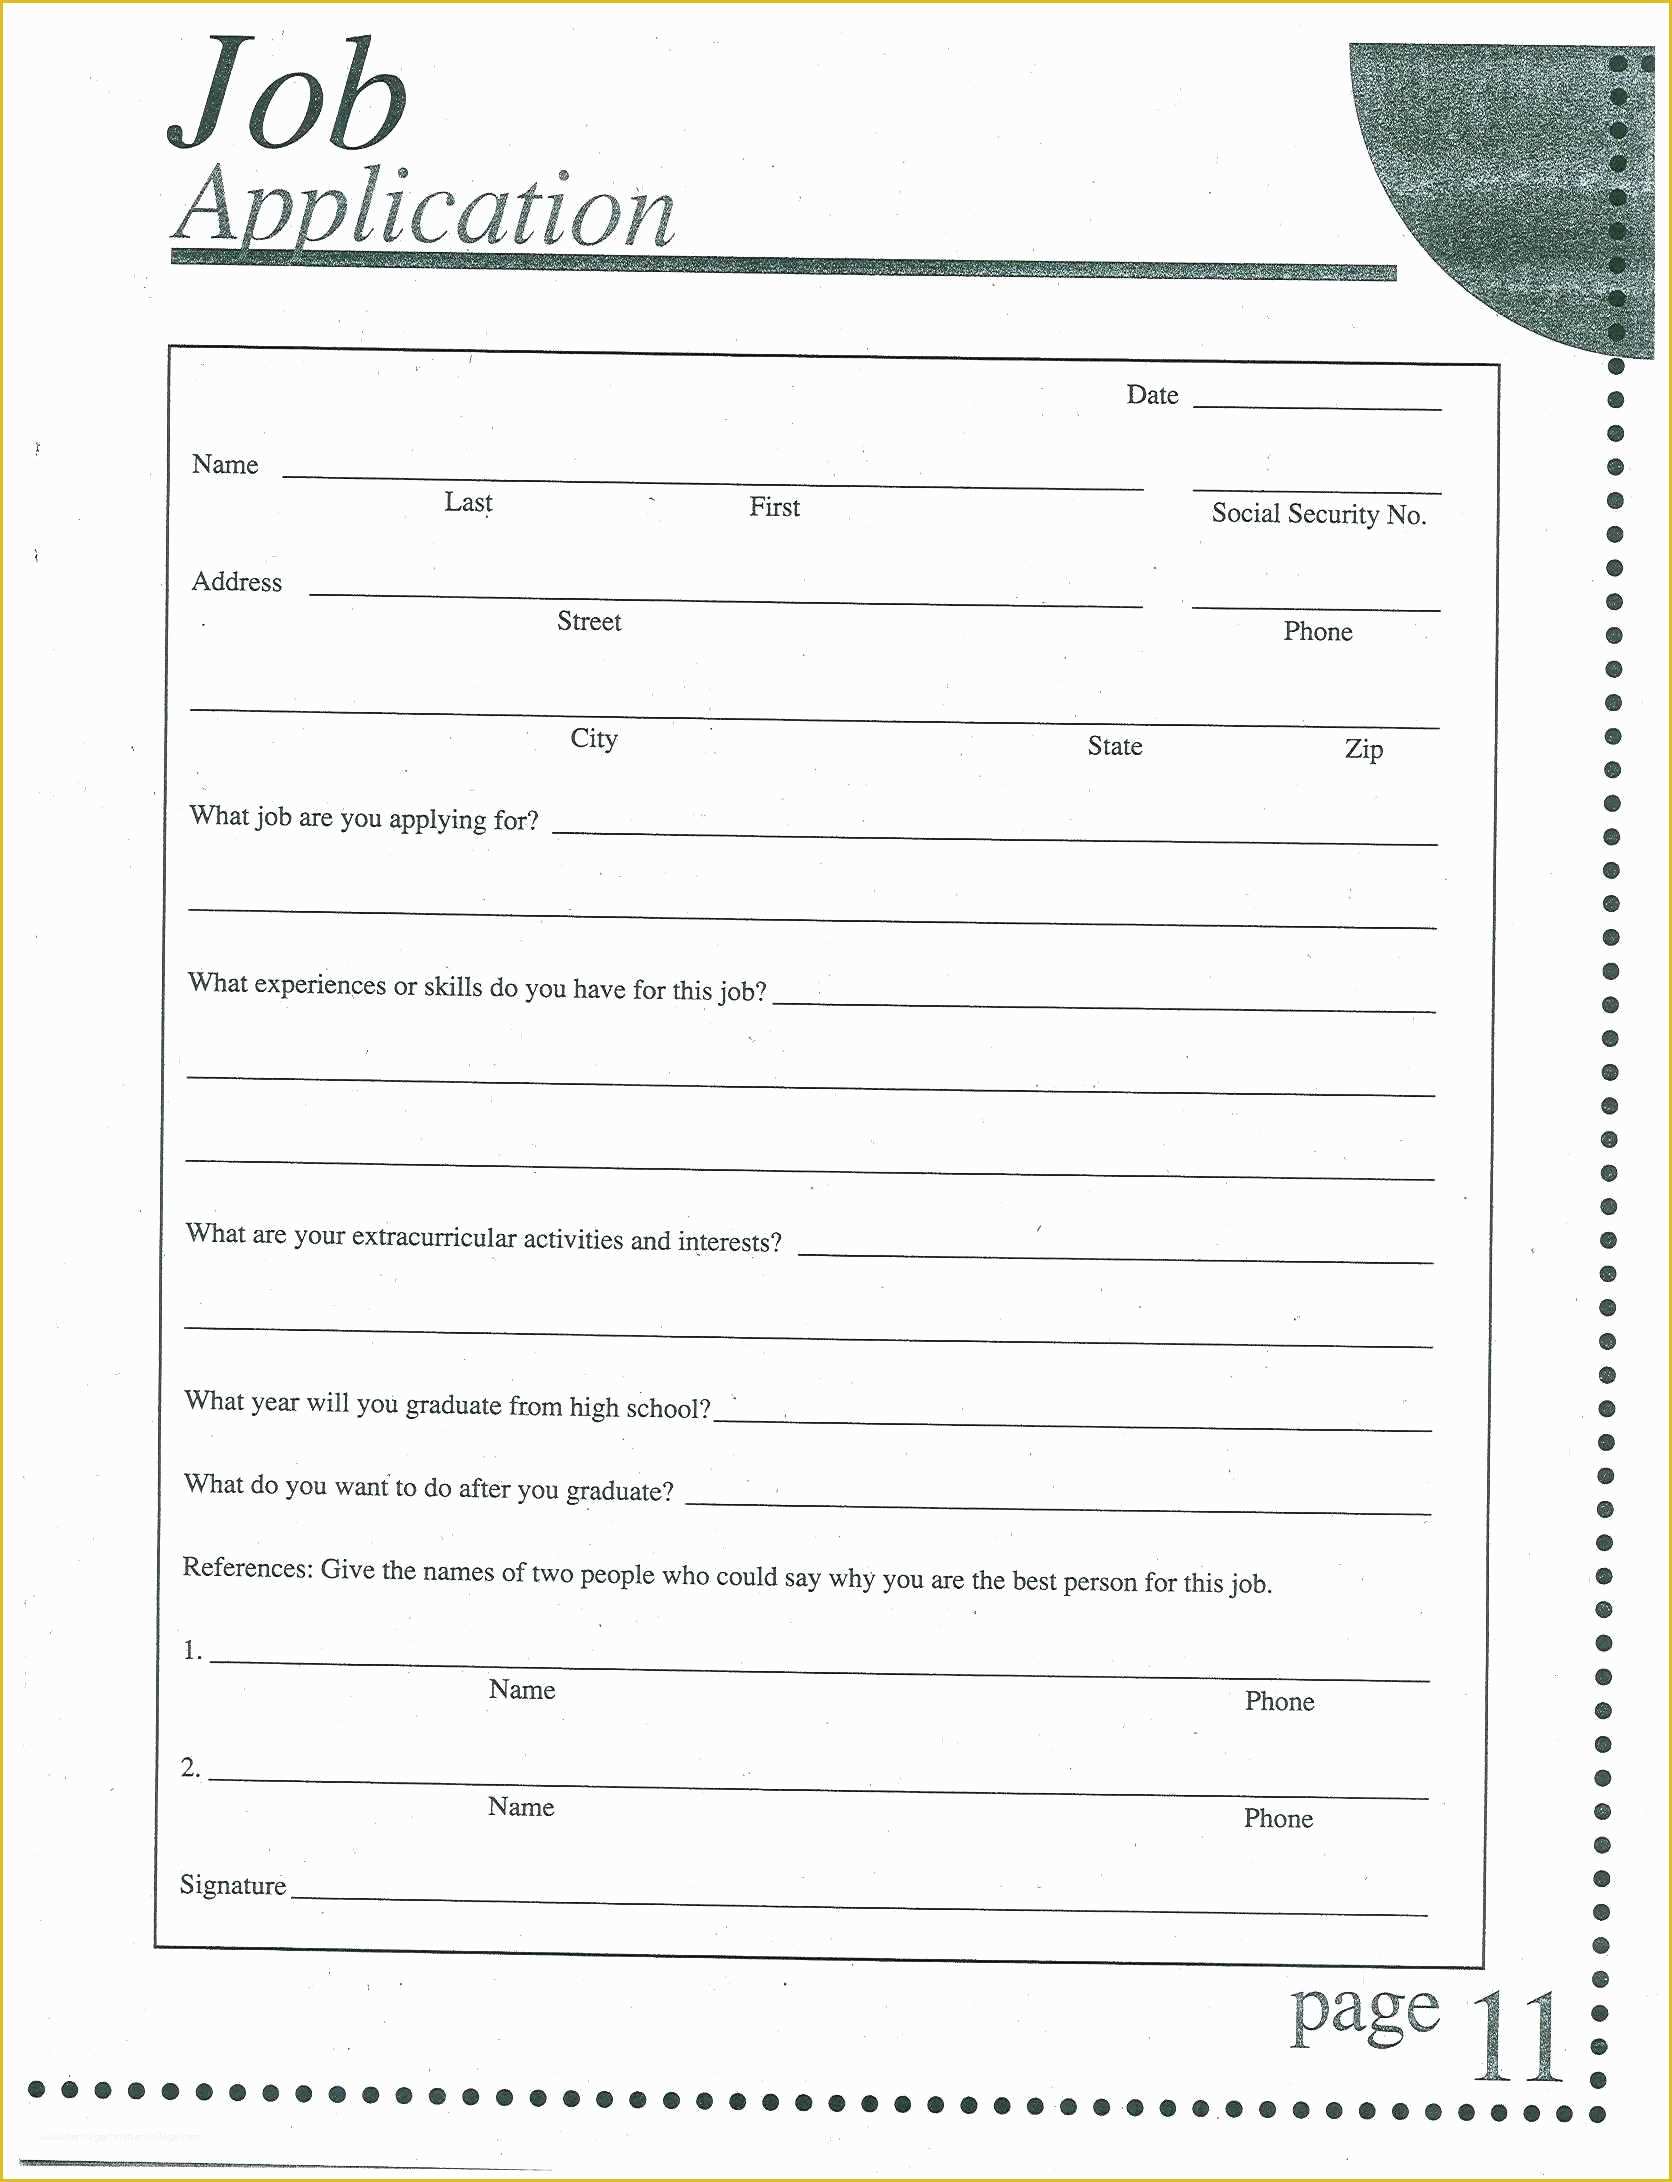 Free Hotel Registration form Template Of Free Hotel Registration form Template Elegant Design